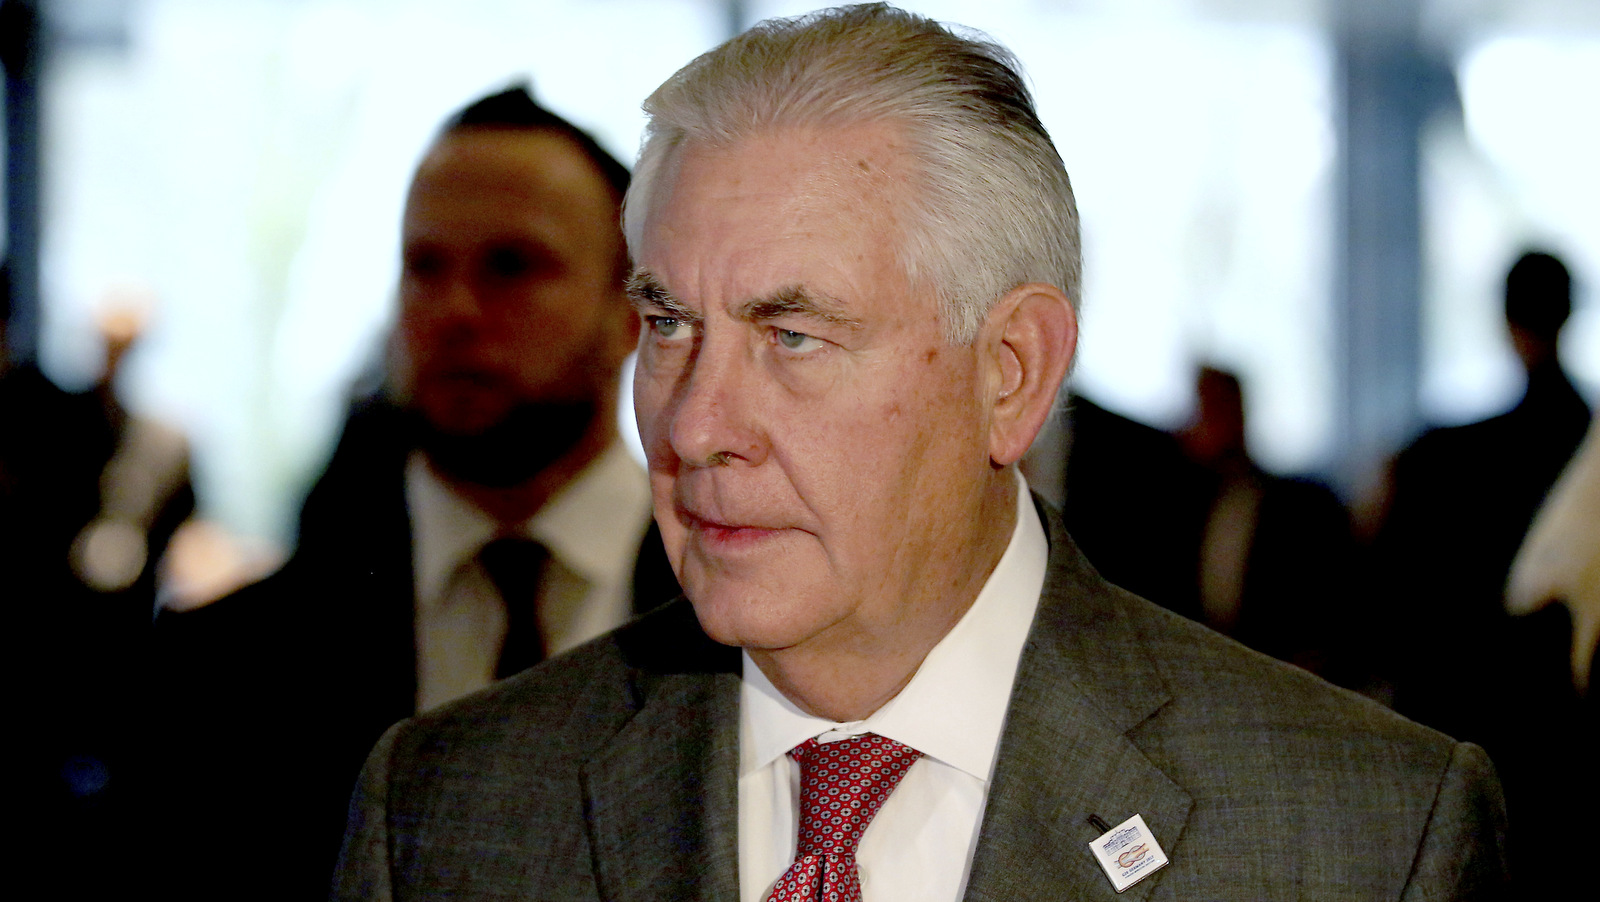 U.S. Secretary of State Rex Tillerson arrives for a meeting on the conflict in Syria during a meeting of the G-20 Foreign Ministers in Bonn, western Germany, Friday, Feb. 17, 2017. (Oliver Berg/pool photo via AP)